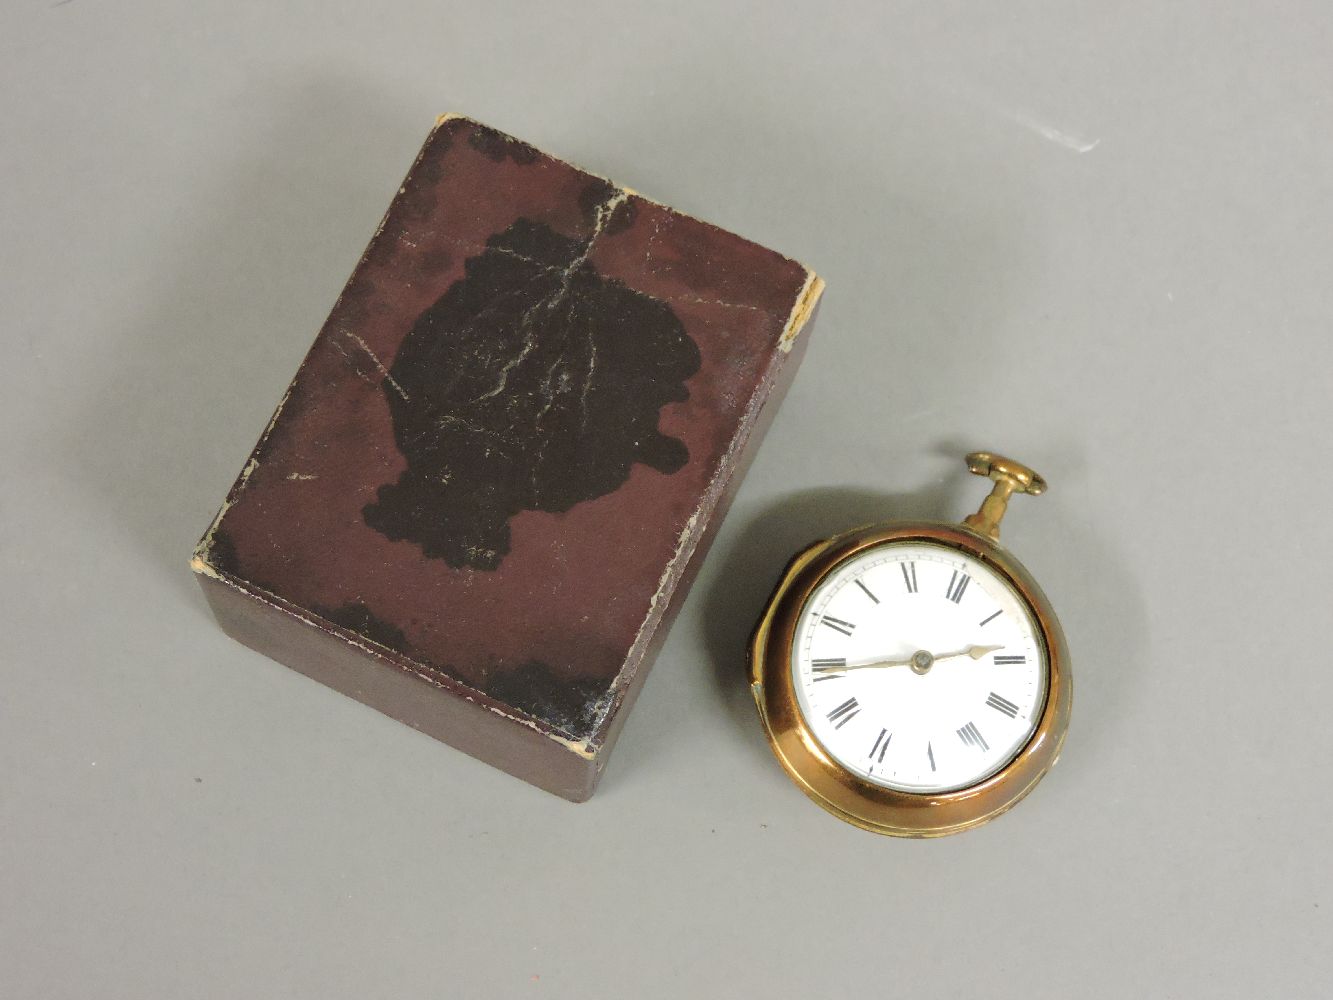 An early to mid 19th century pair cased brass pocket watch, with key wind and fusee movement, signed